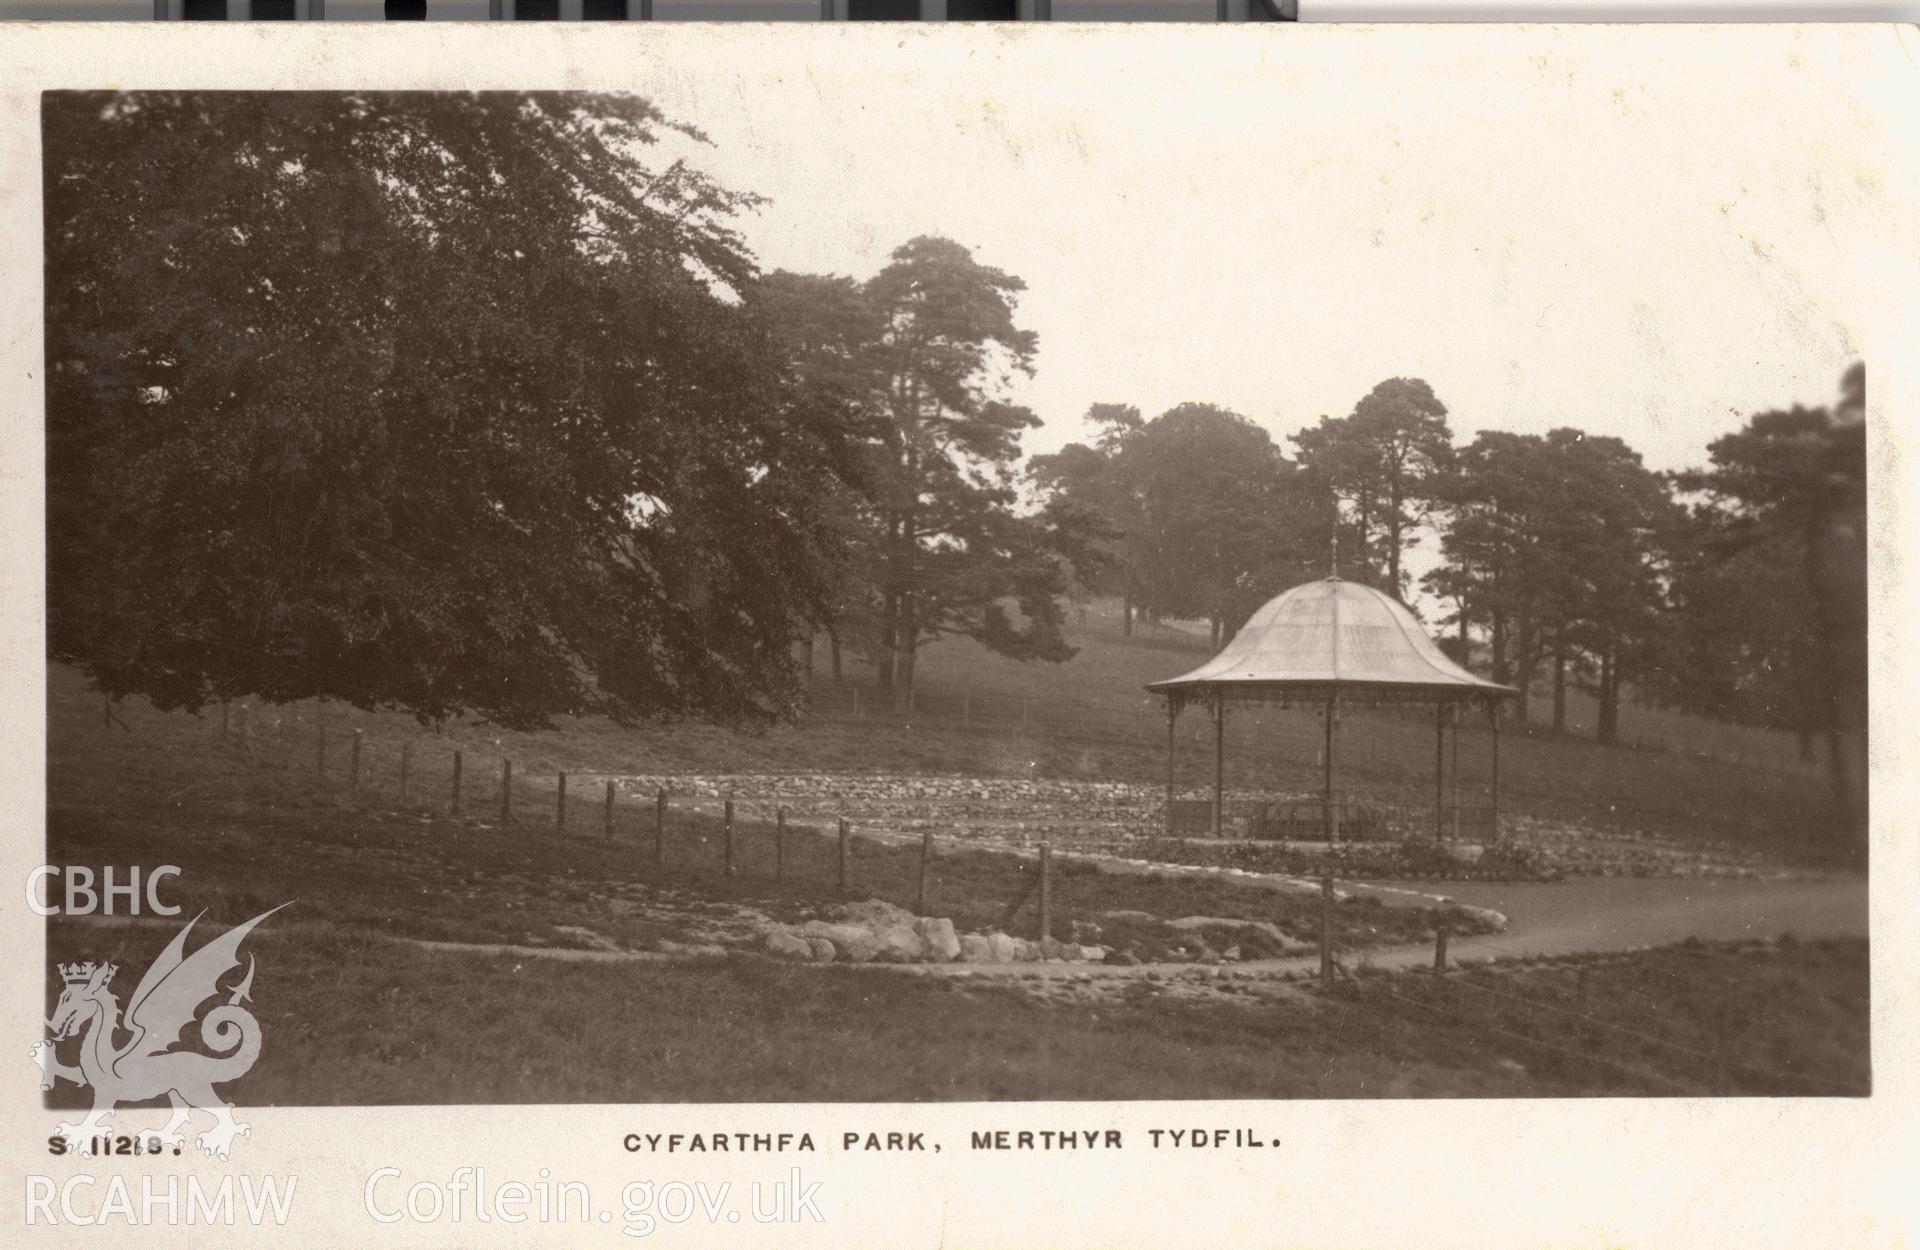 Digitised postcard image of Cyfarthfa Park, Merthyr Tydfil, showing bandstand, Kingsway real Photo Series. Produced by Parks and Gardens Data Services, from an original item in the Peter Davis Collection at Parks and Gardens UK. We hold only web-resolution images of this collection, suitable for viewing on screen and for research purposes only. We do not hold the original images, or publication quality scans.